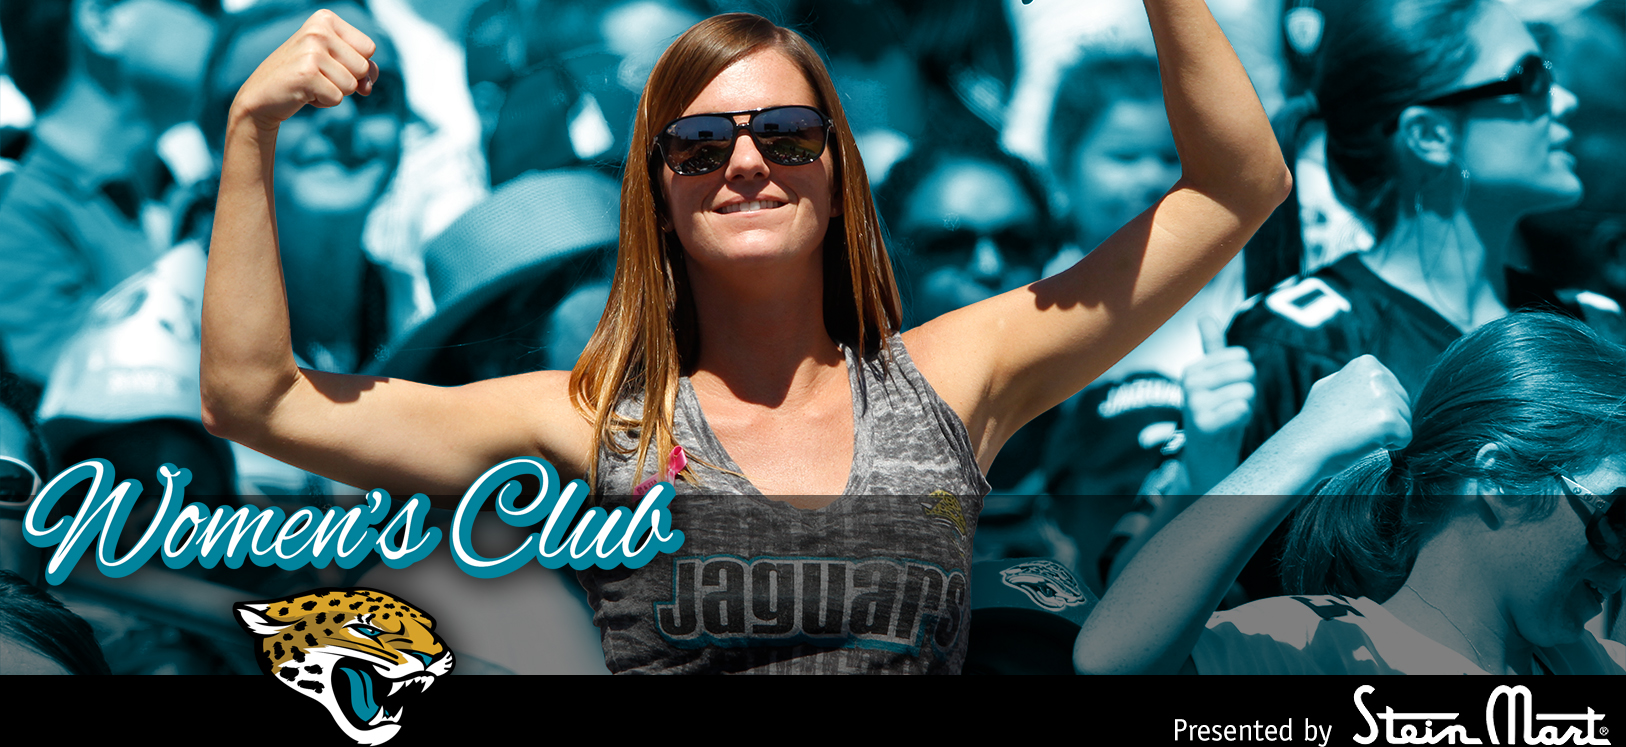 Jaguars Become 7th Team In the NFL To Add Official Women’s Fan Club